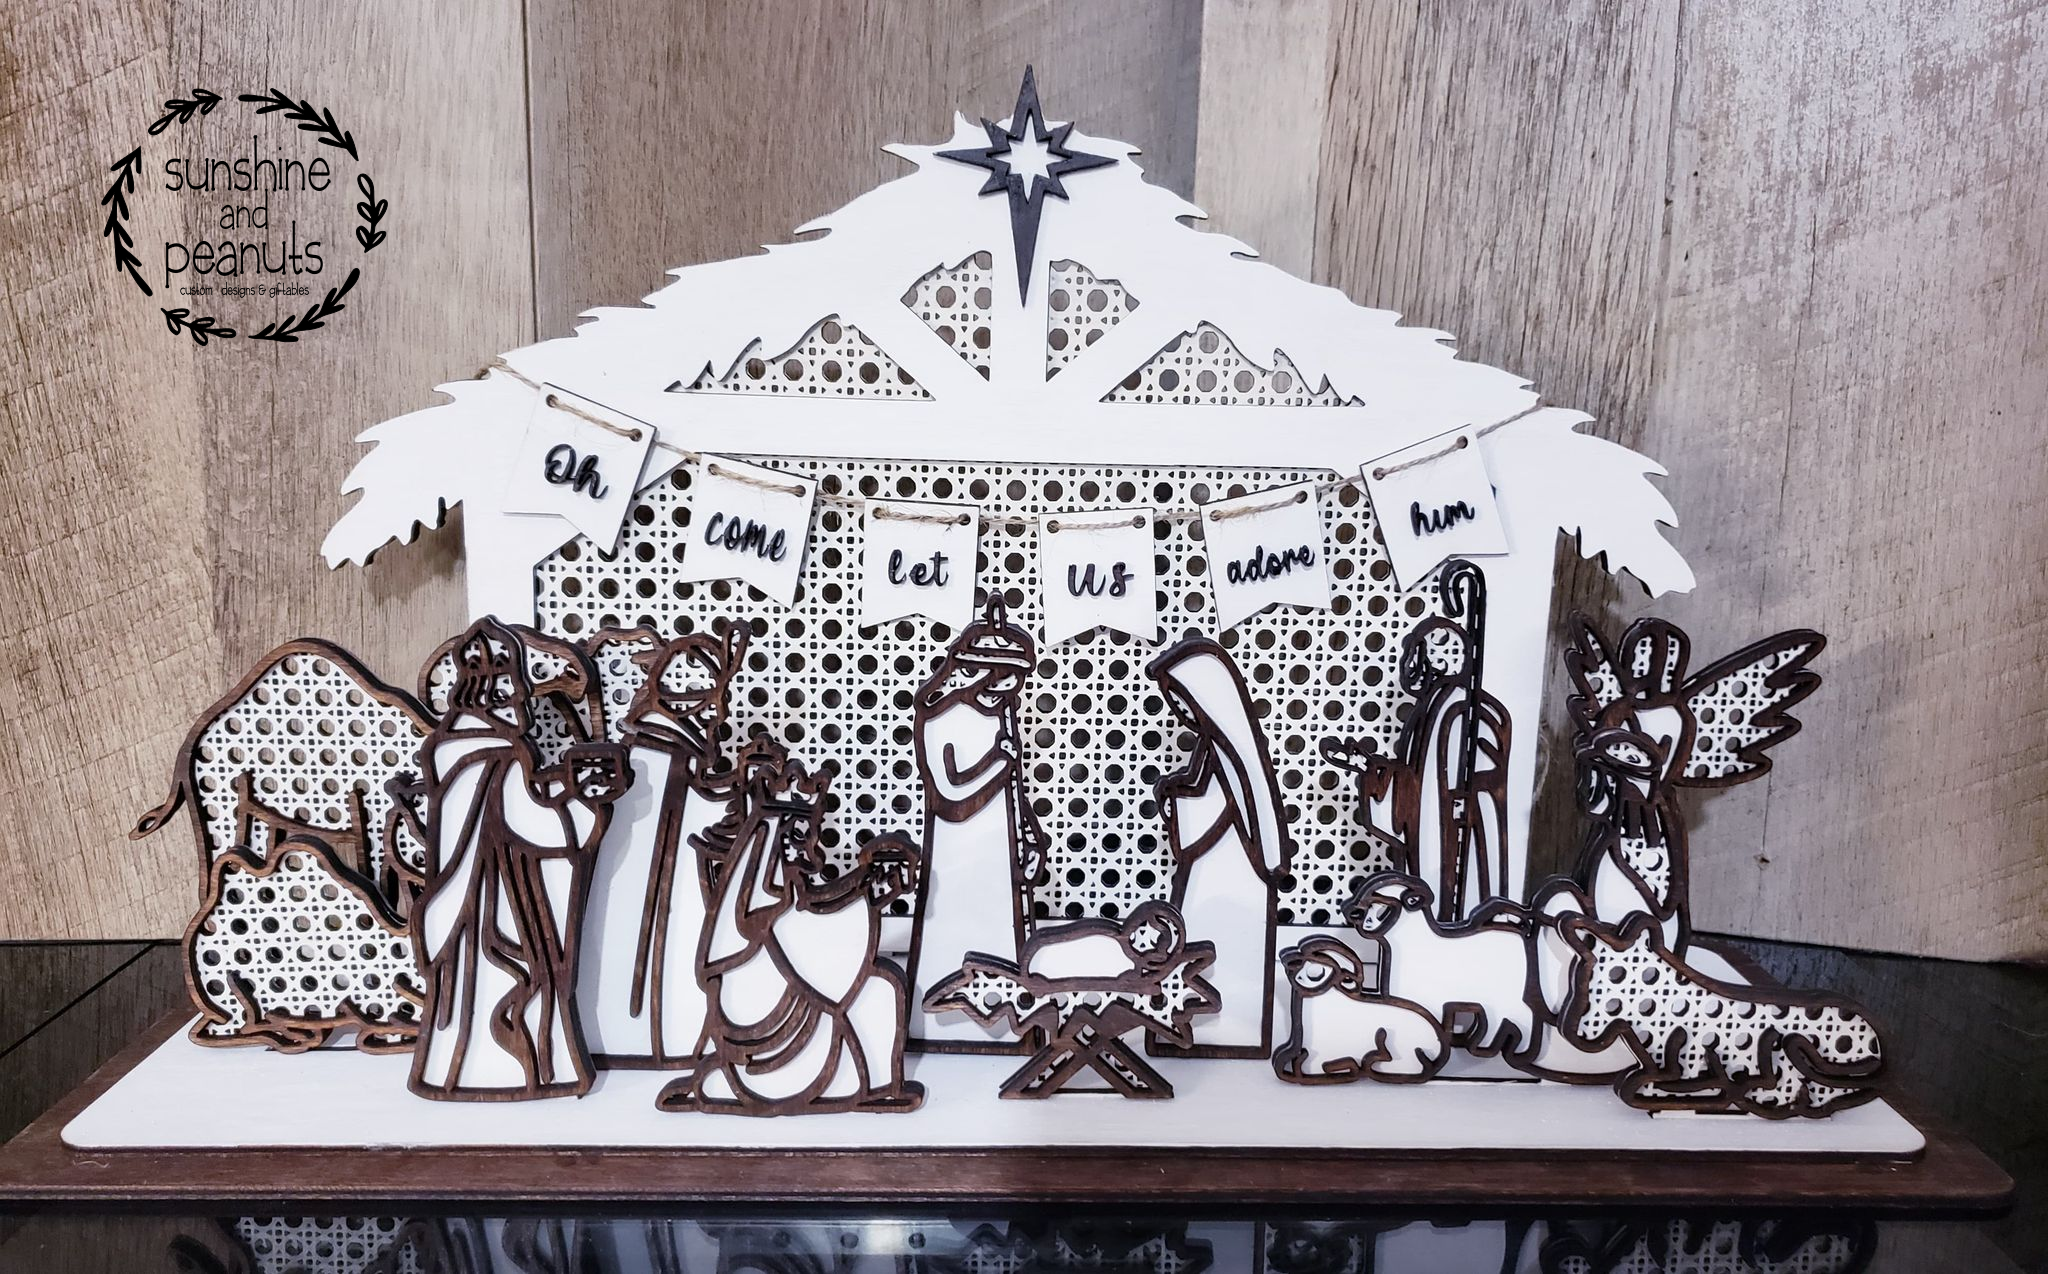 Bring a touch of timeless elegance to your holiday decor with this beautiful Rattan Nativity Scene. Laser cut from Birch, every piece is hand-painted with White acrylic and stained with a Walnut trim, forming a lovely miniature diorama. This set of 16 pieces includes the stable, draping banner, 3 camels, 3 Wise Men, 2 shepherds, a donkey, an angel, Mary, Joseph, and Baby Jesus in the manger. Measures 10" high, 18" wide, and 6" deep when assembled. Order now and have your Nativity Scene ready in 5-7 days!